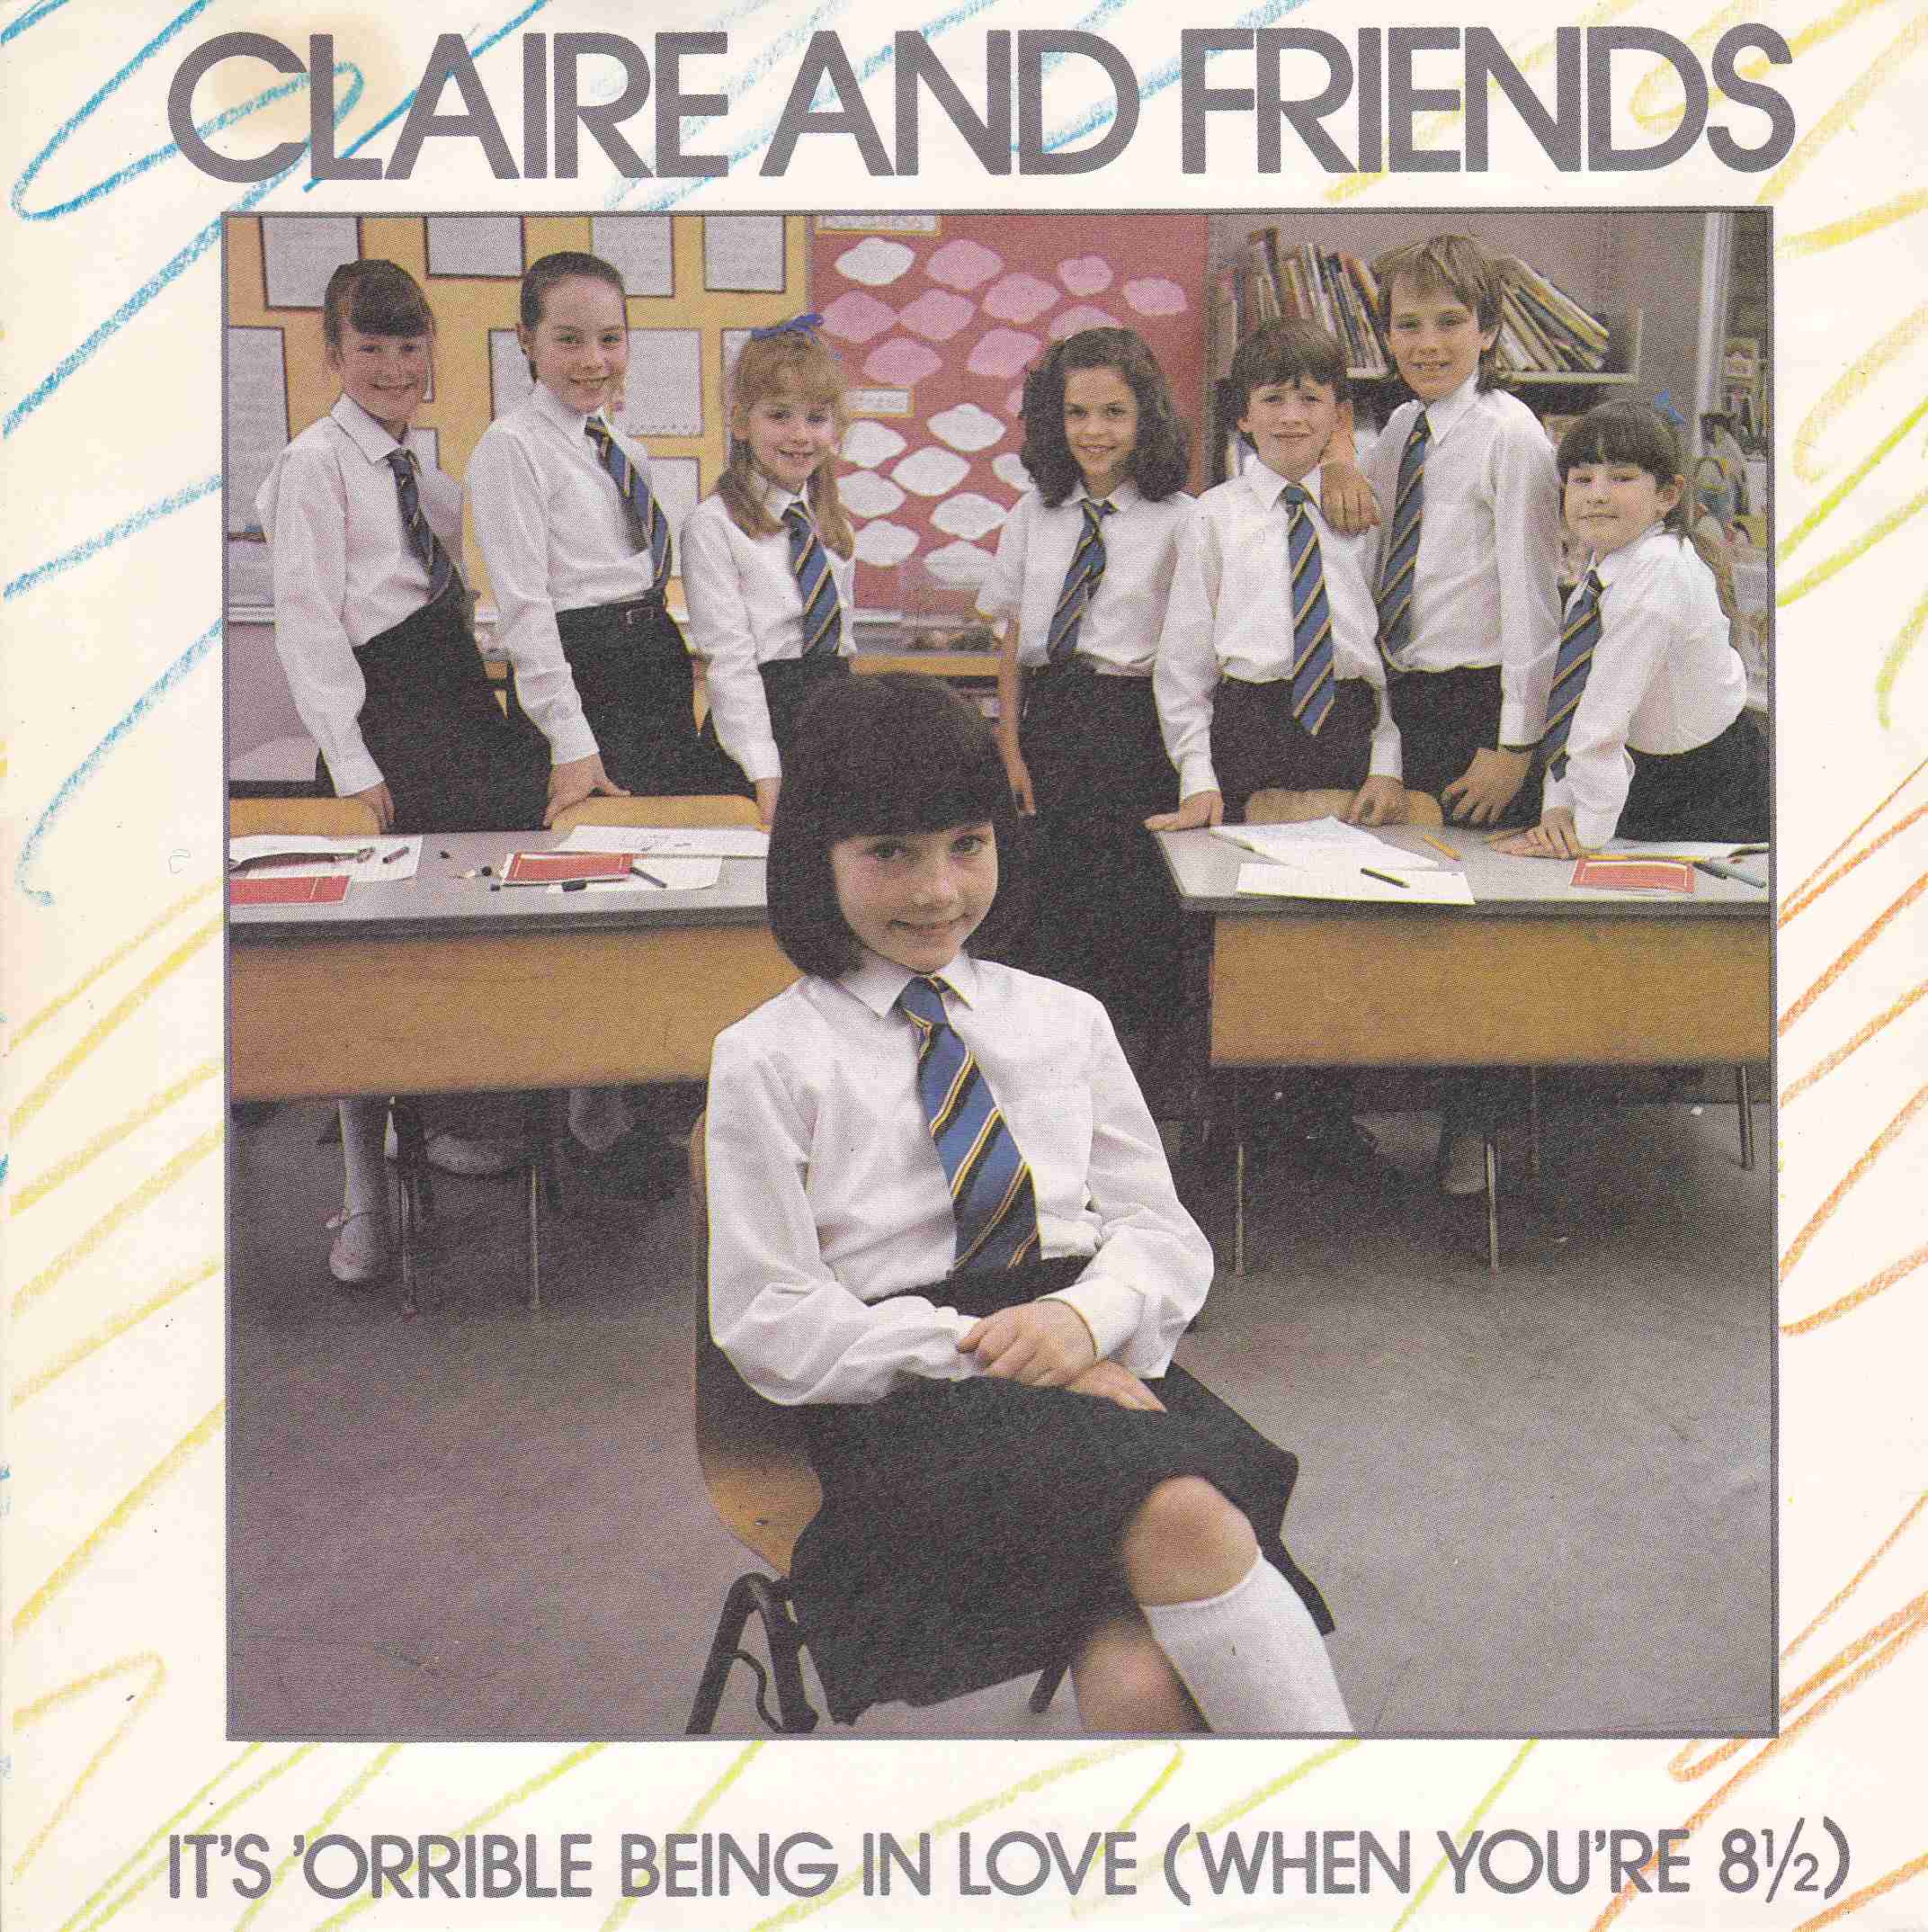 Picture of RESL 189 It's 'orrible being in love (when you're 8 1/2) by artist Claire and Friends \(Claire Usher\) from the BBC records and Tapes library